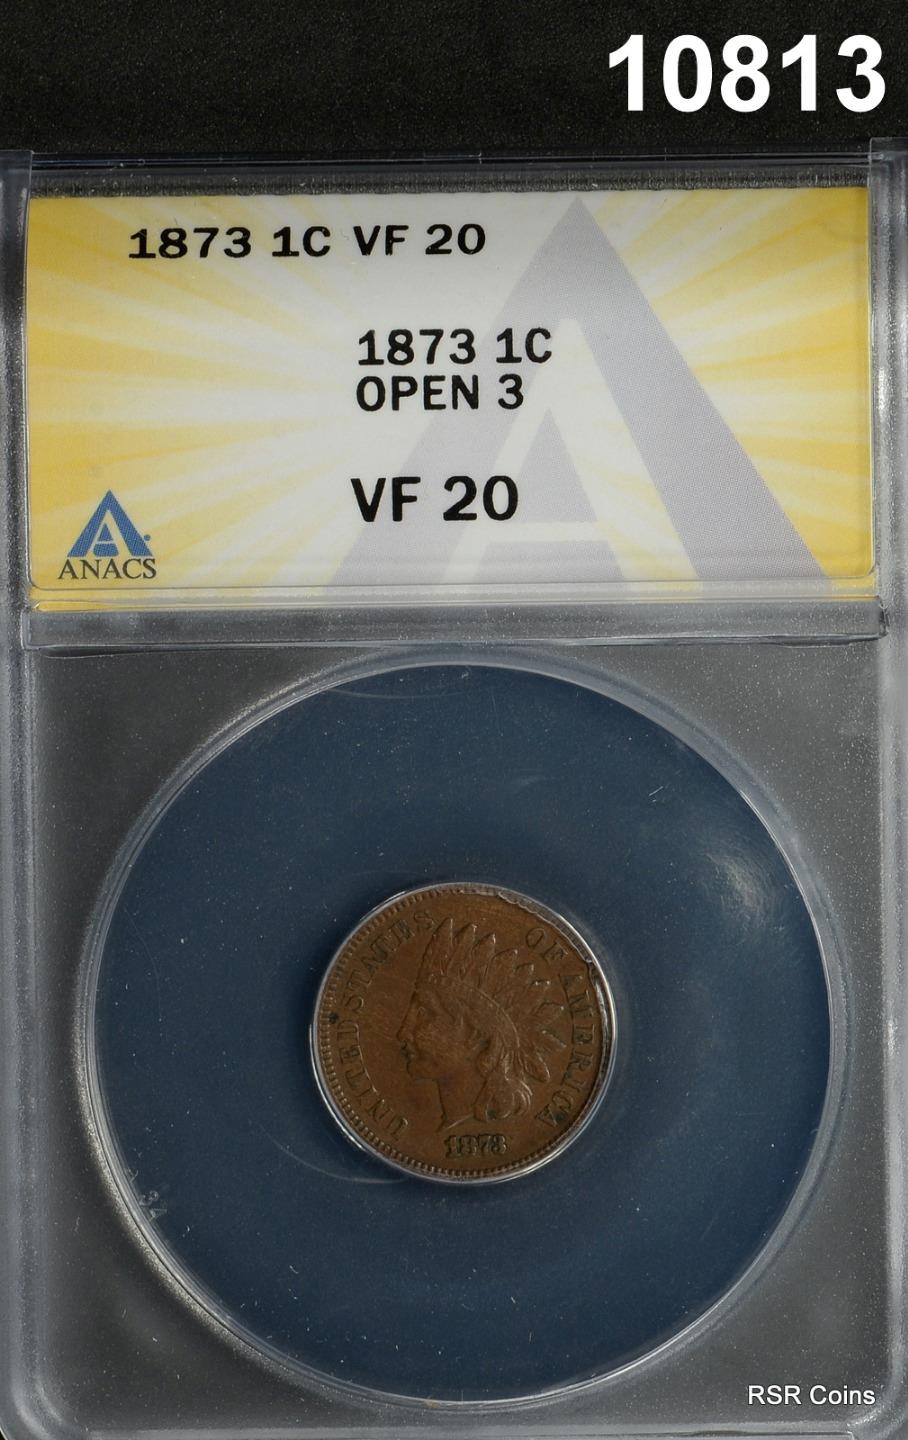 1873 INDIAN HEAD CENT ANACS CERTIFIED VF20 OPEN 3 SCARCE DATE! #10813